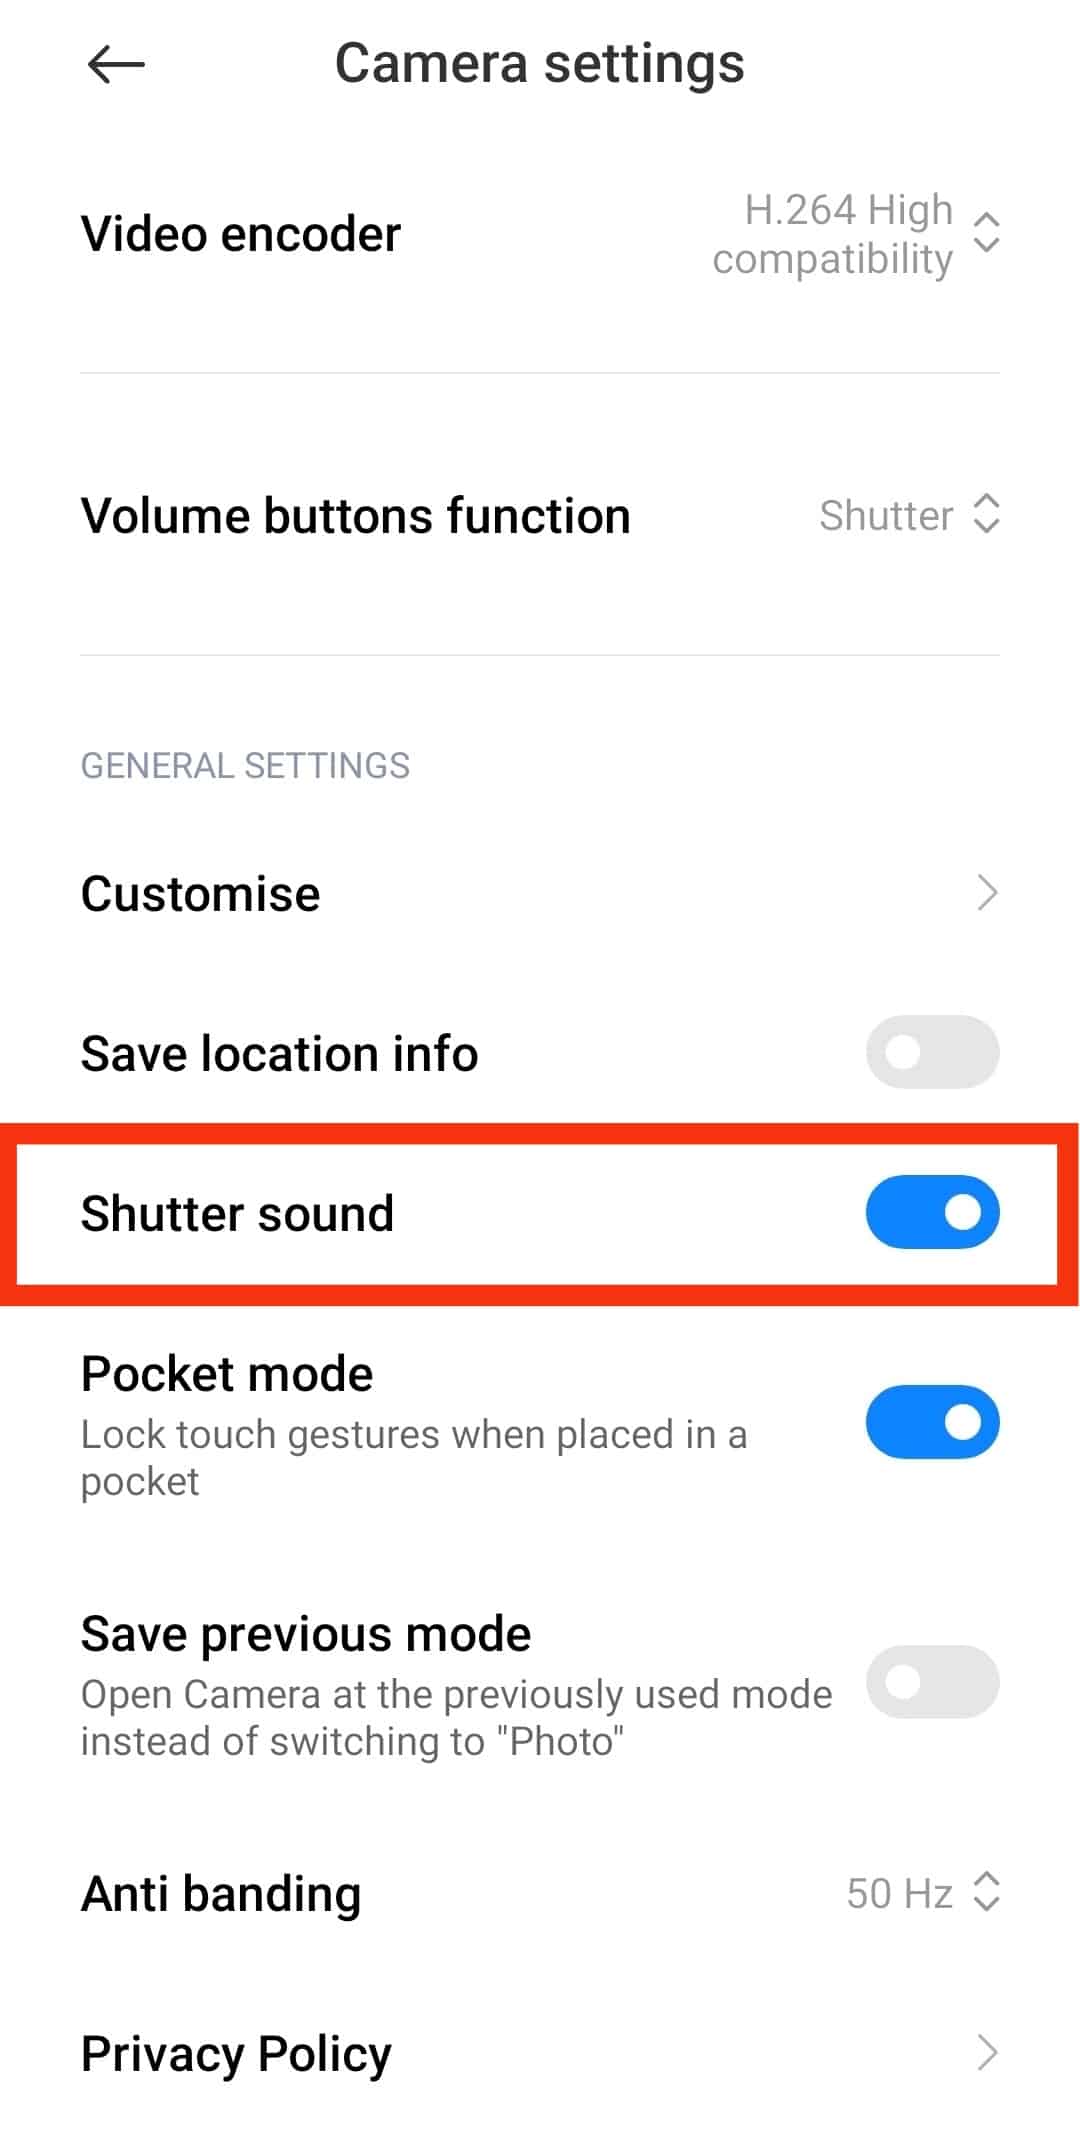 Navigate To The Camera's Settings